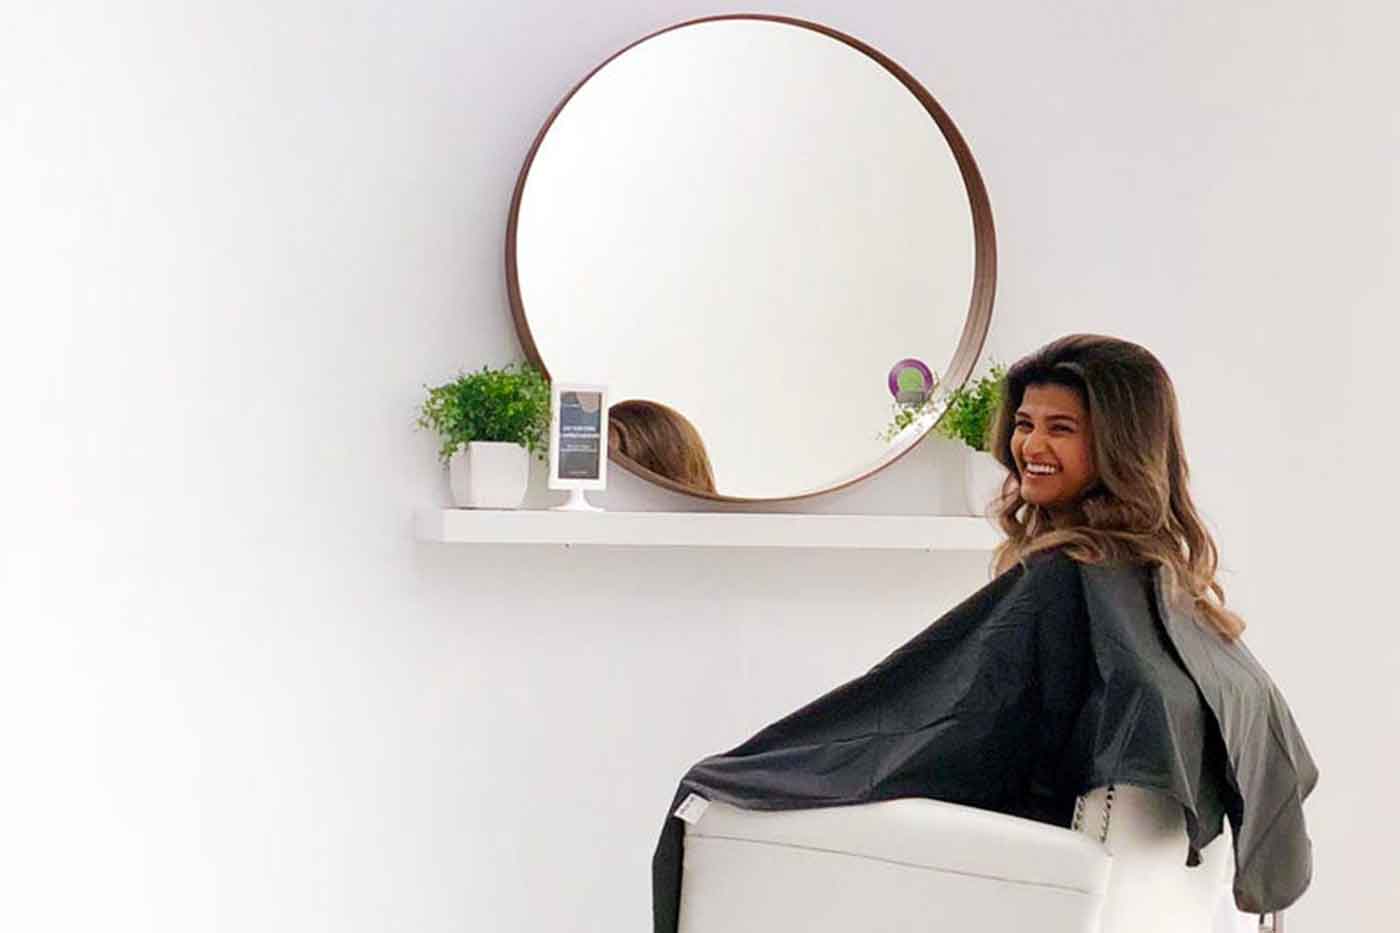 Green Circle focuses on salon sustainability in USA